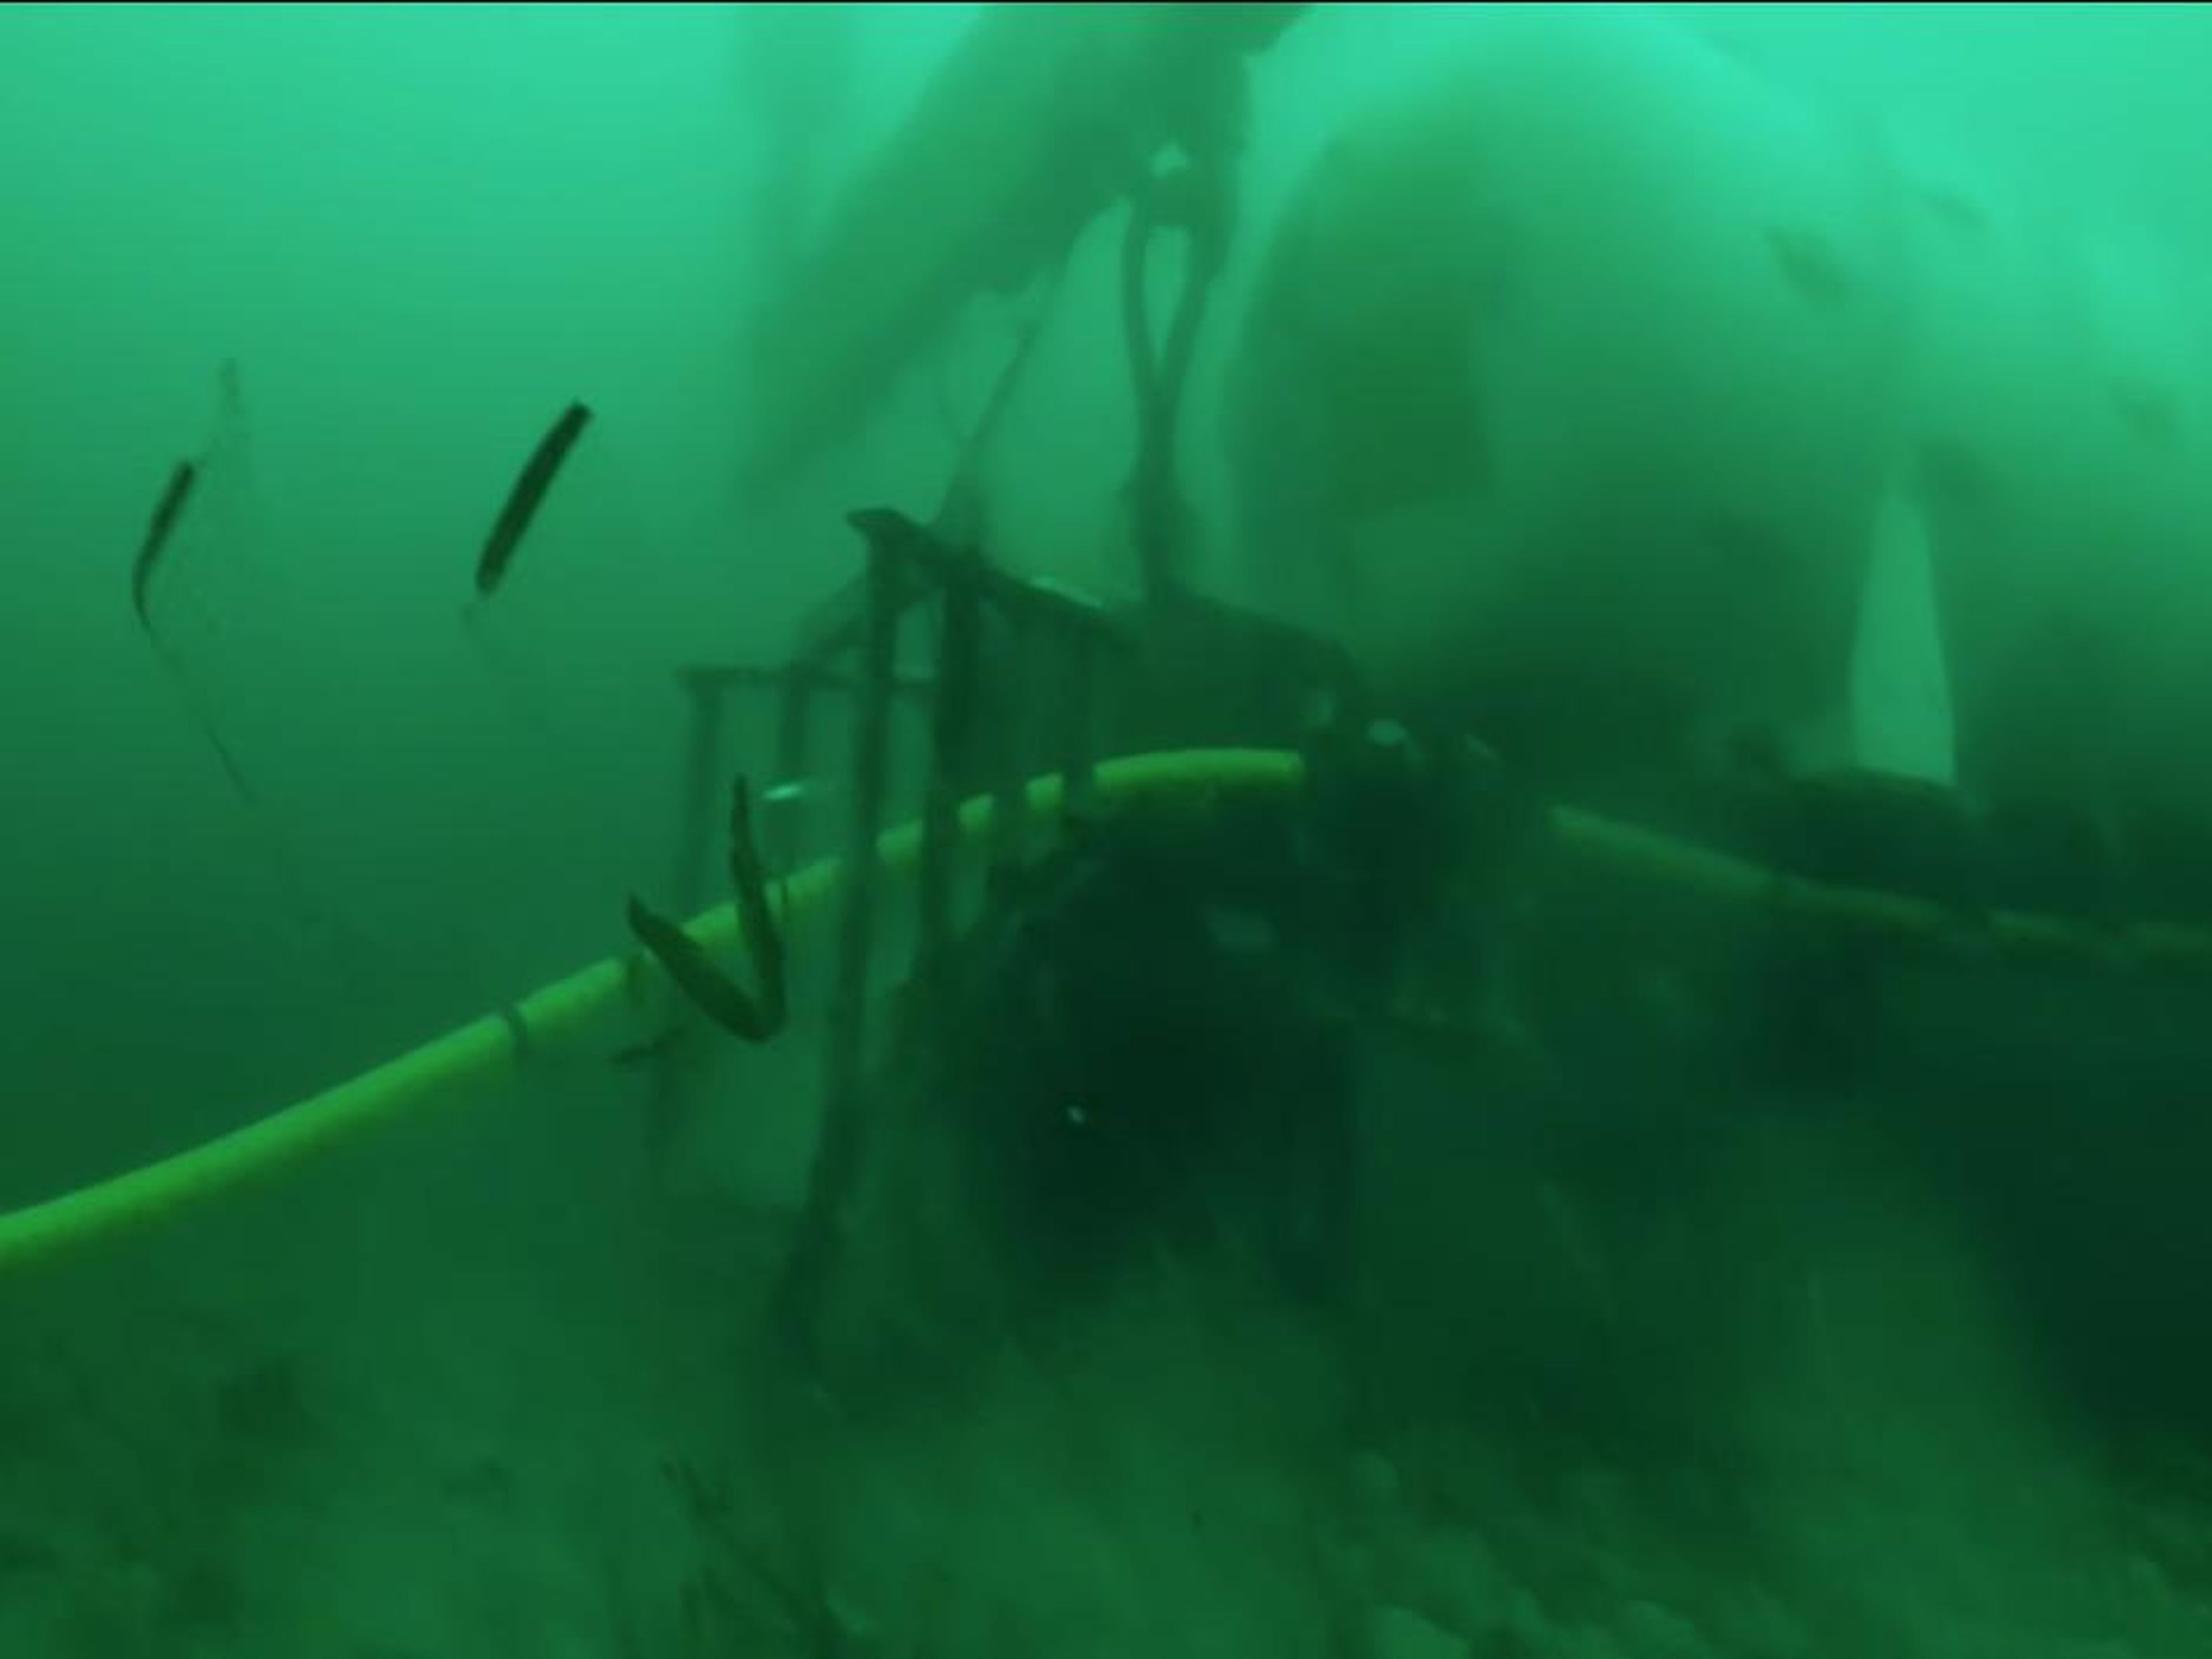 Then the data centre had to be lowered 117 feet to the sea floor — hopefully without springing a leak. That involved 10 winches, a crane, a gantry barge, and a remotely operated vehicle.